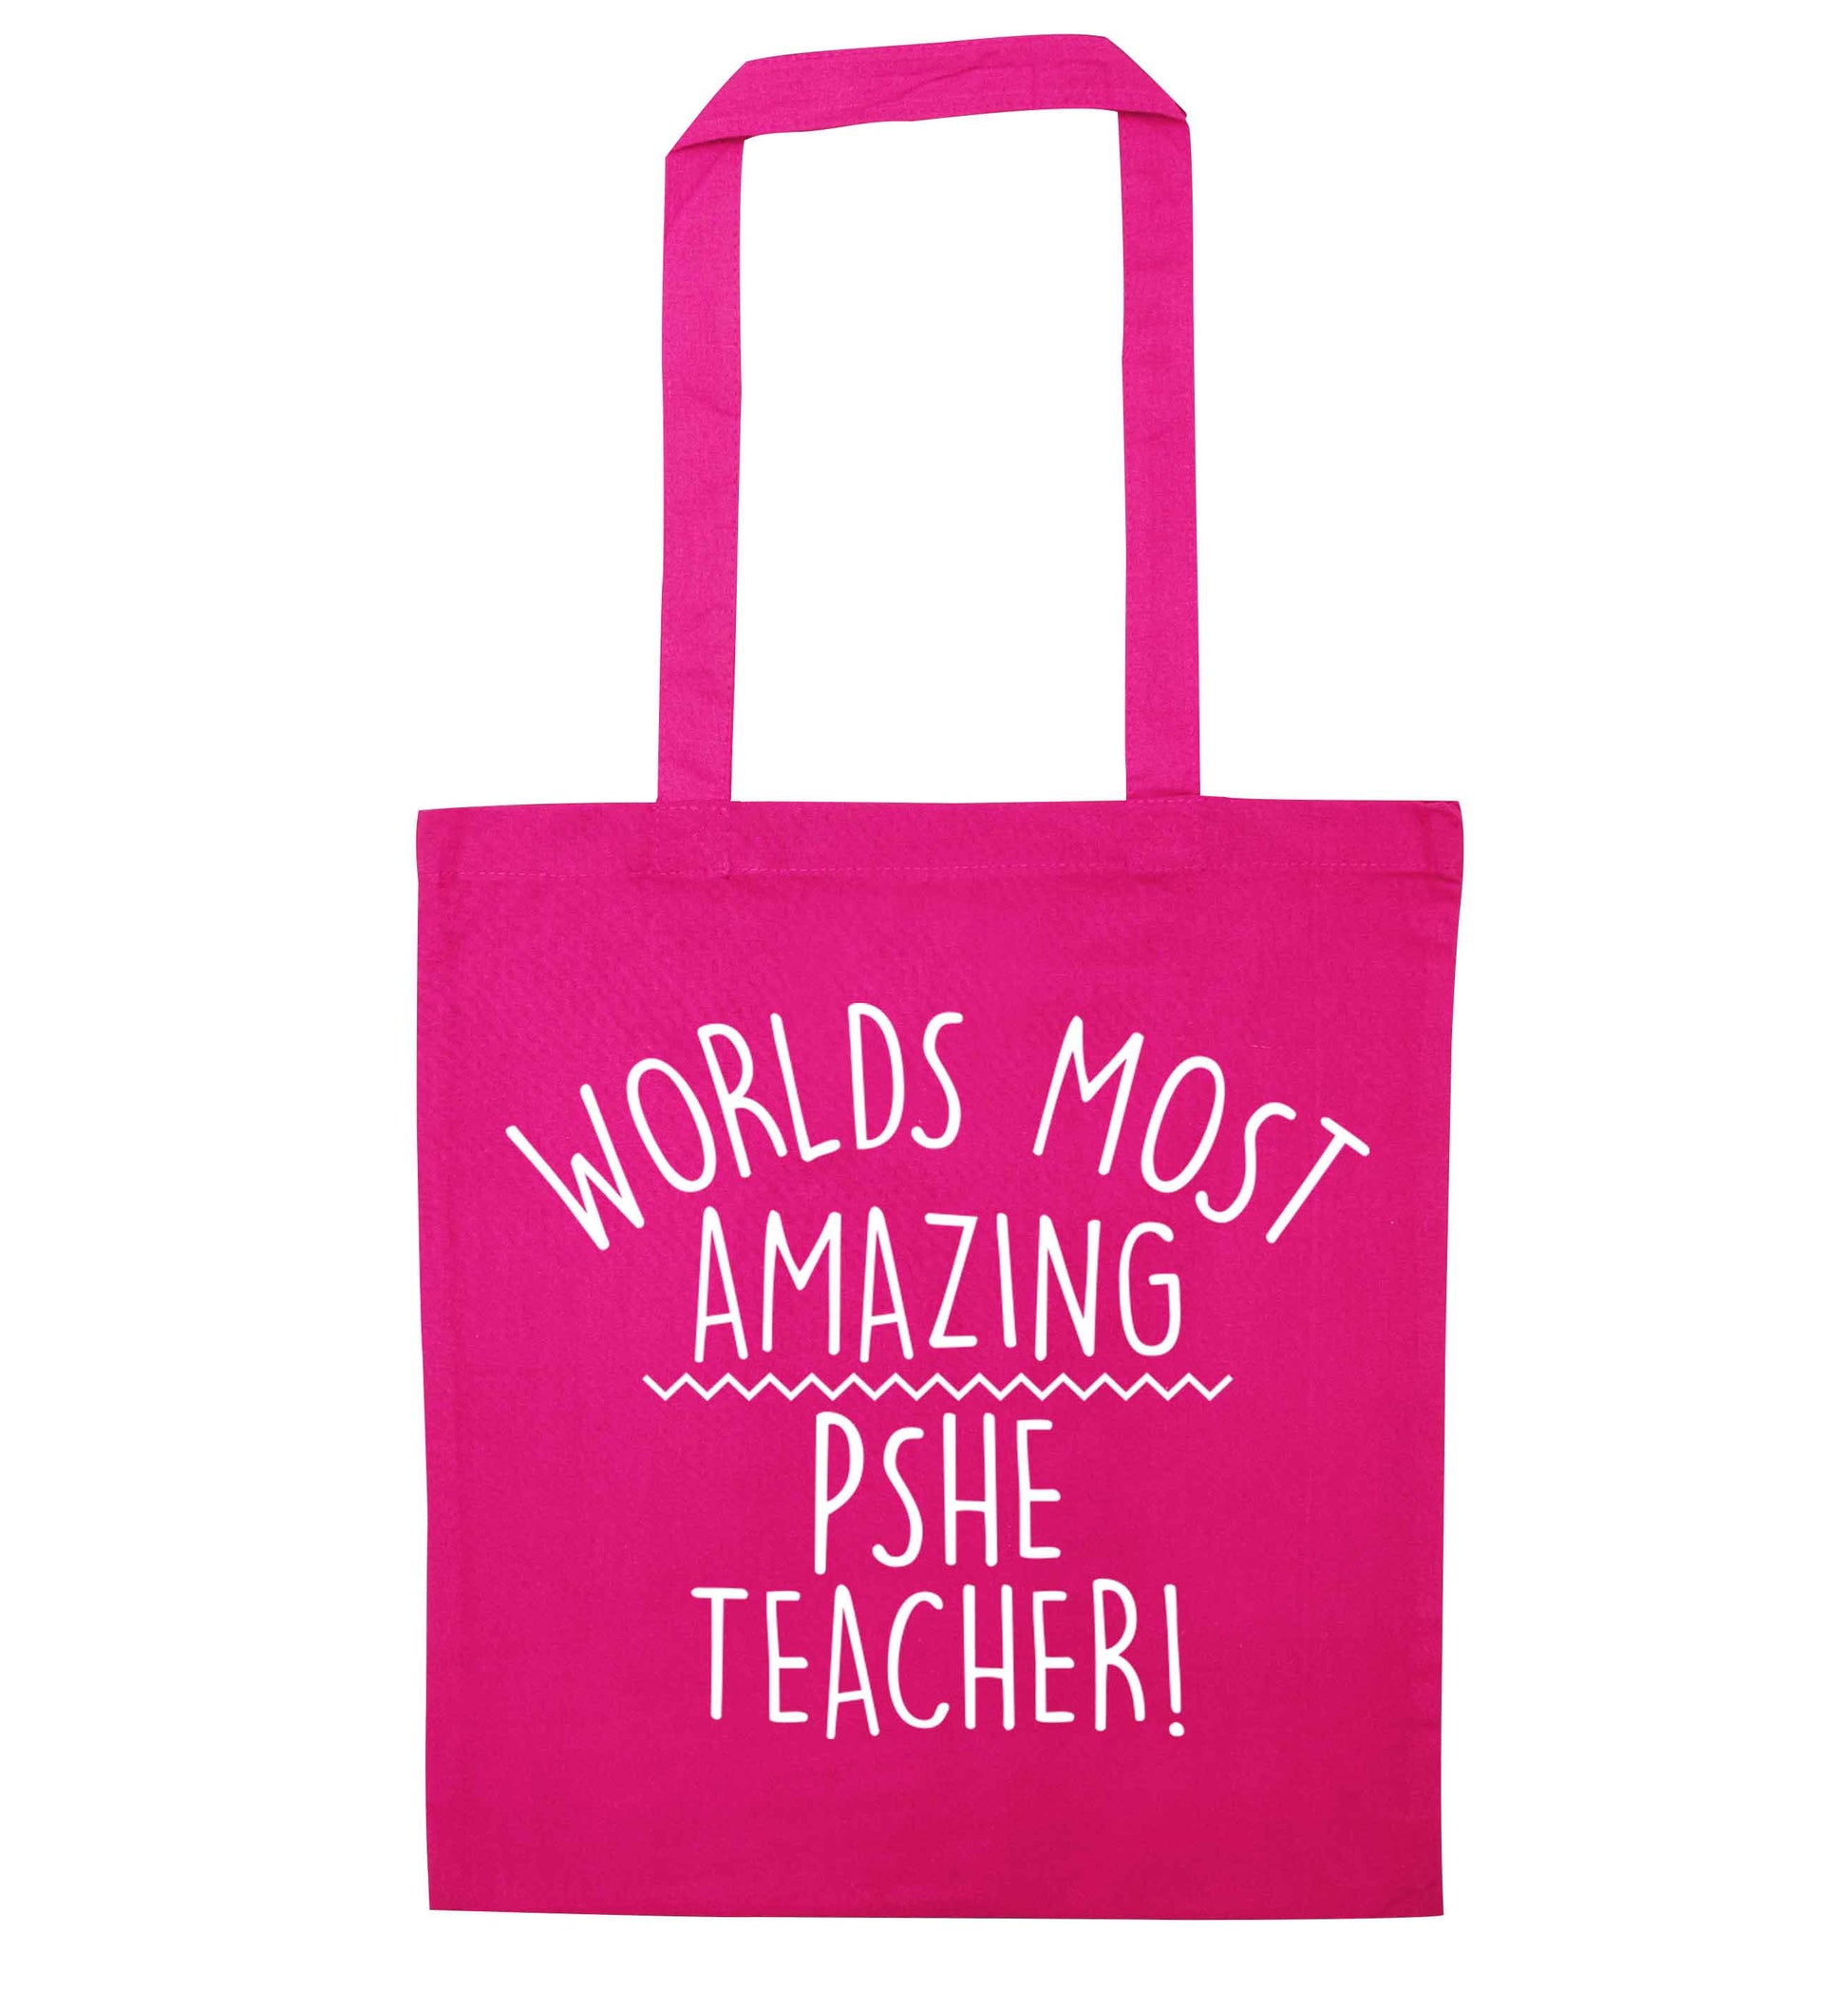 Worlds most amazing PHSE teacher pink tote bag